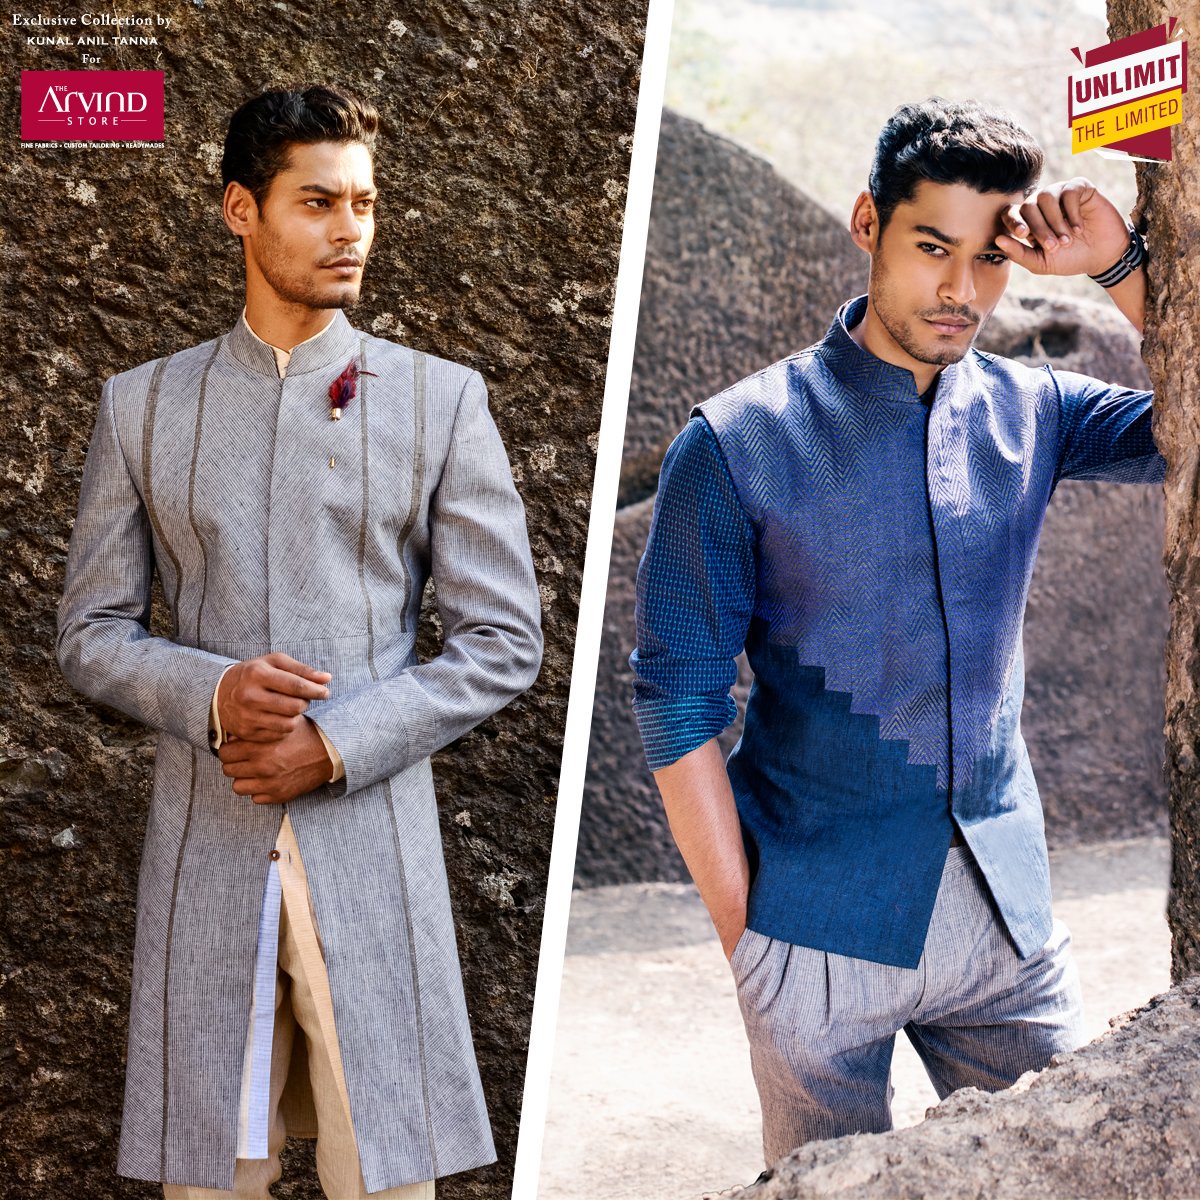 Pick a classy Sherwani or a Jacquard Bandi jacket from our exclusive collection at https://t.co/HIQ51suCp4 https://t.co/Hh1mVcPwAJ